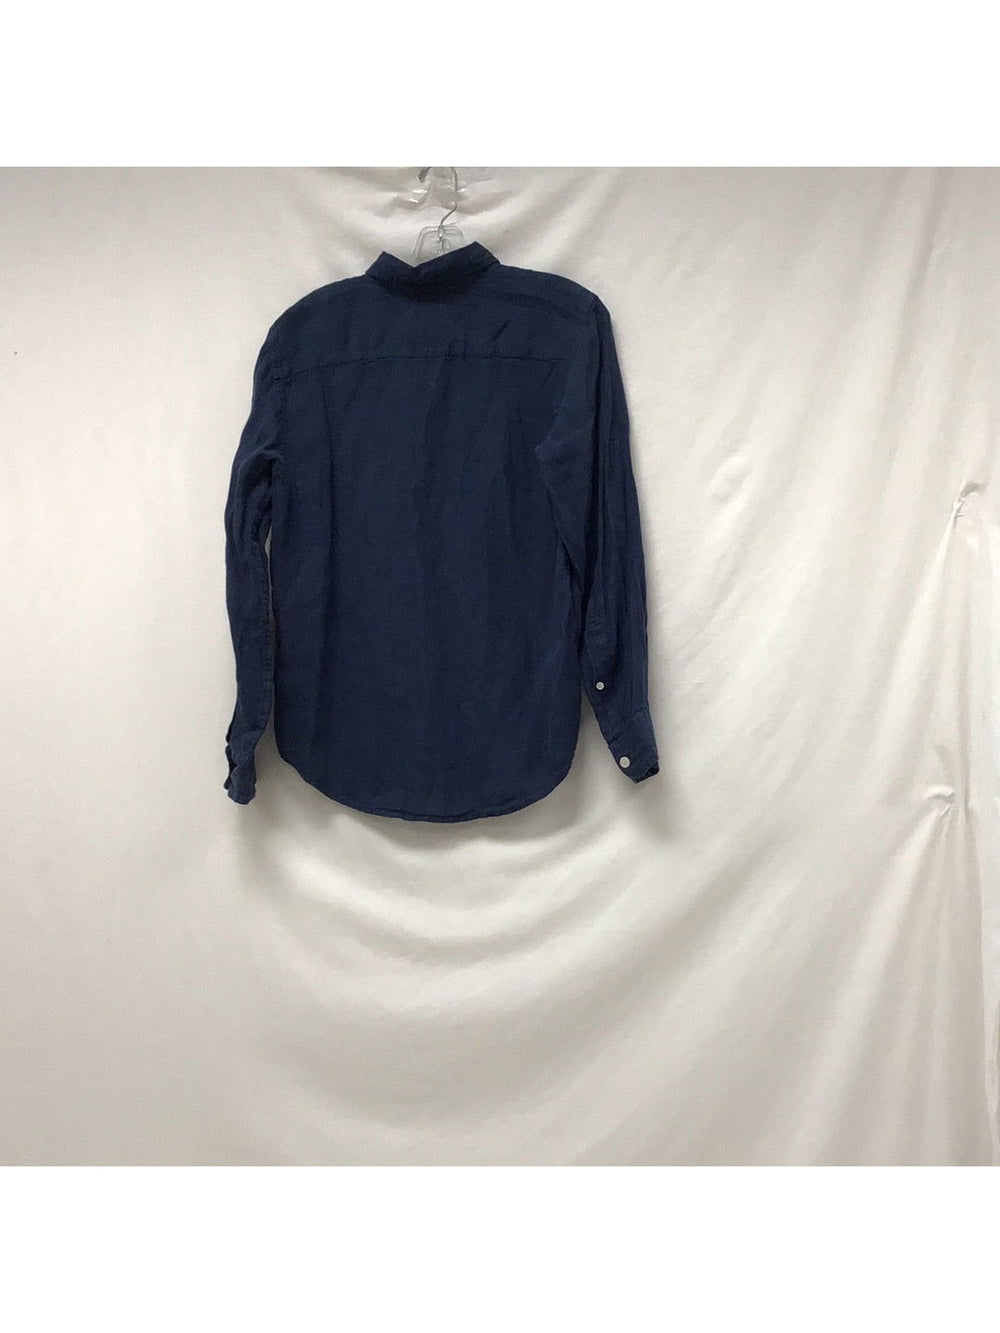 Men's Abercrombie & Fitch Navy Blue Button Down Long Sleeve Shirt XS - The Kennedy Collective Thrift - 